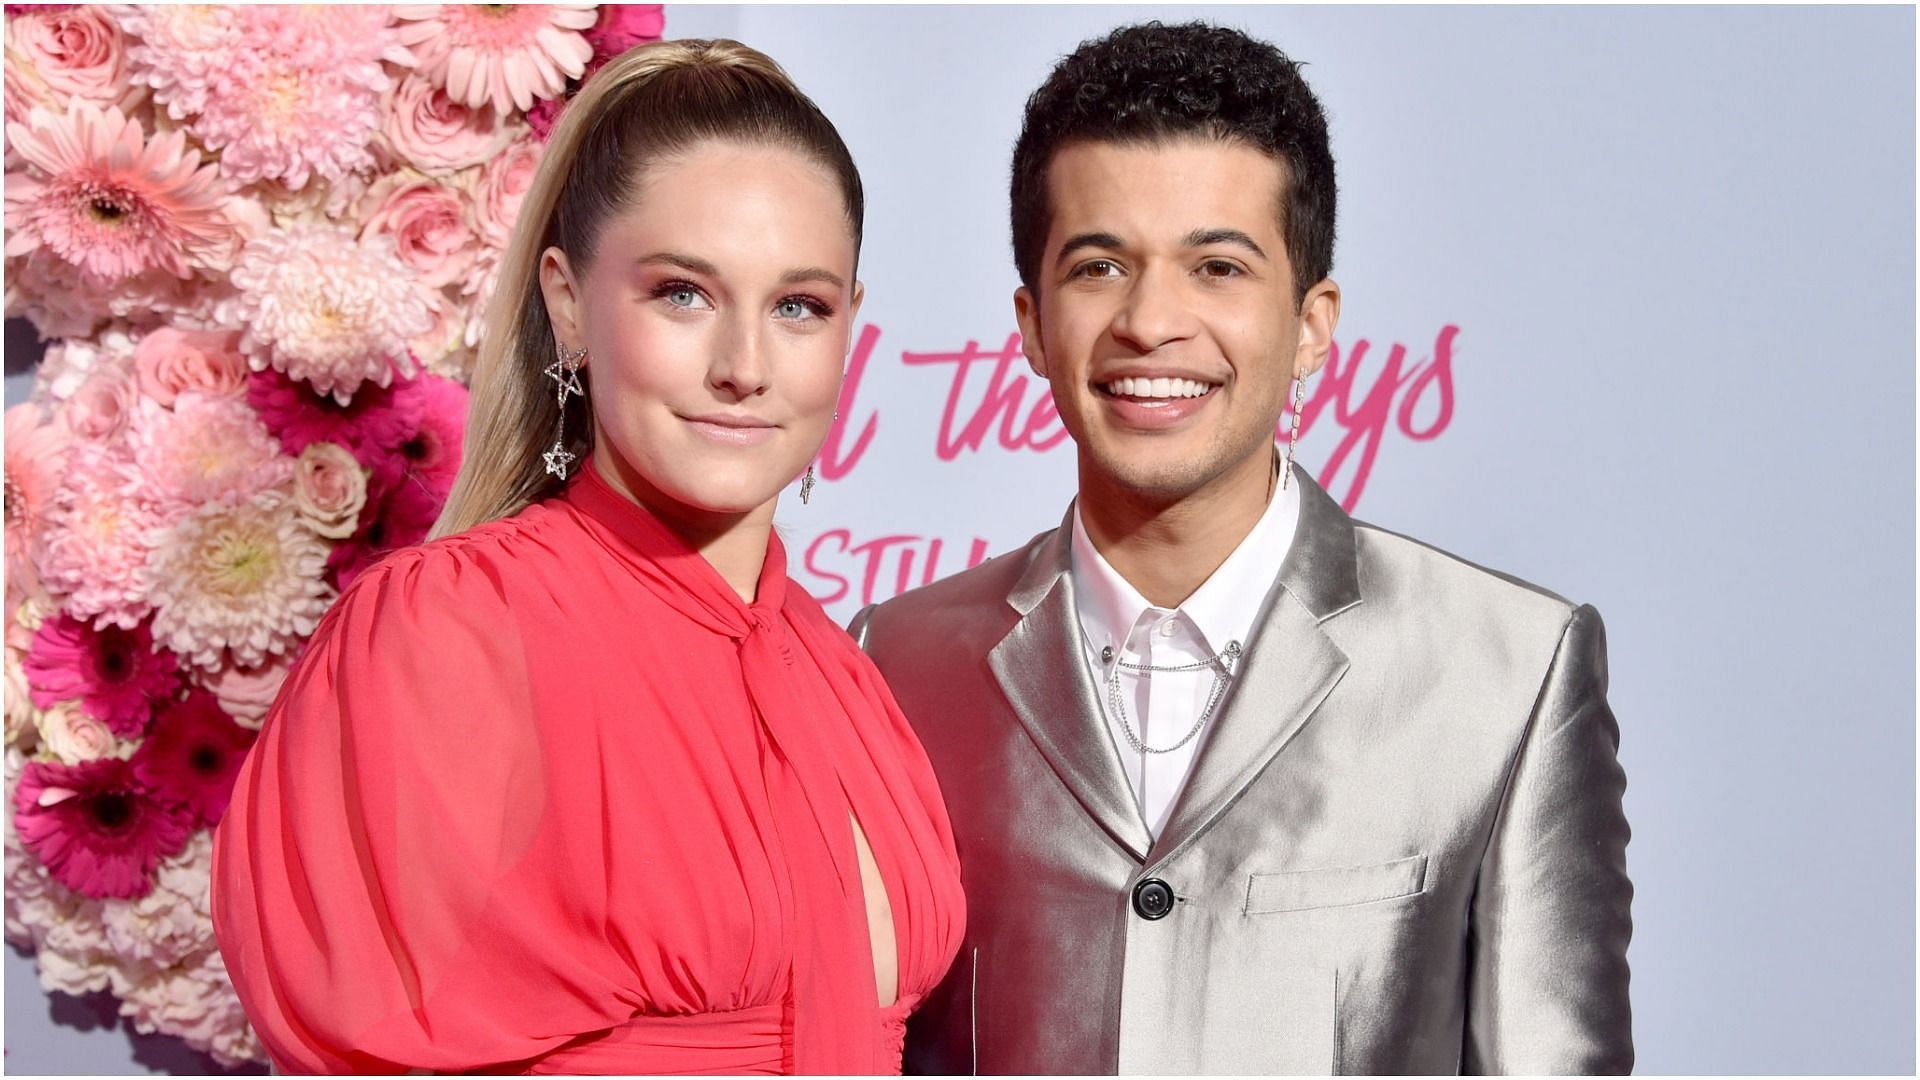 Jordan Fisher and Ellie Woods are expecting their first baby together (Image by Gregg DeGuire via Getty Images)